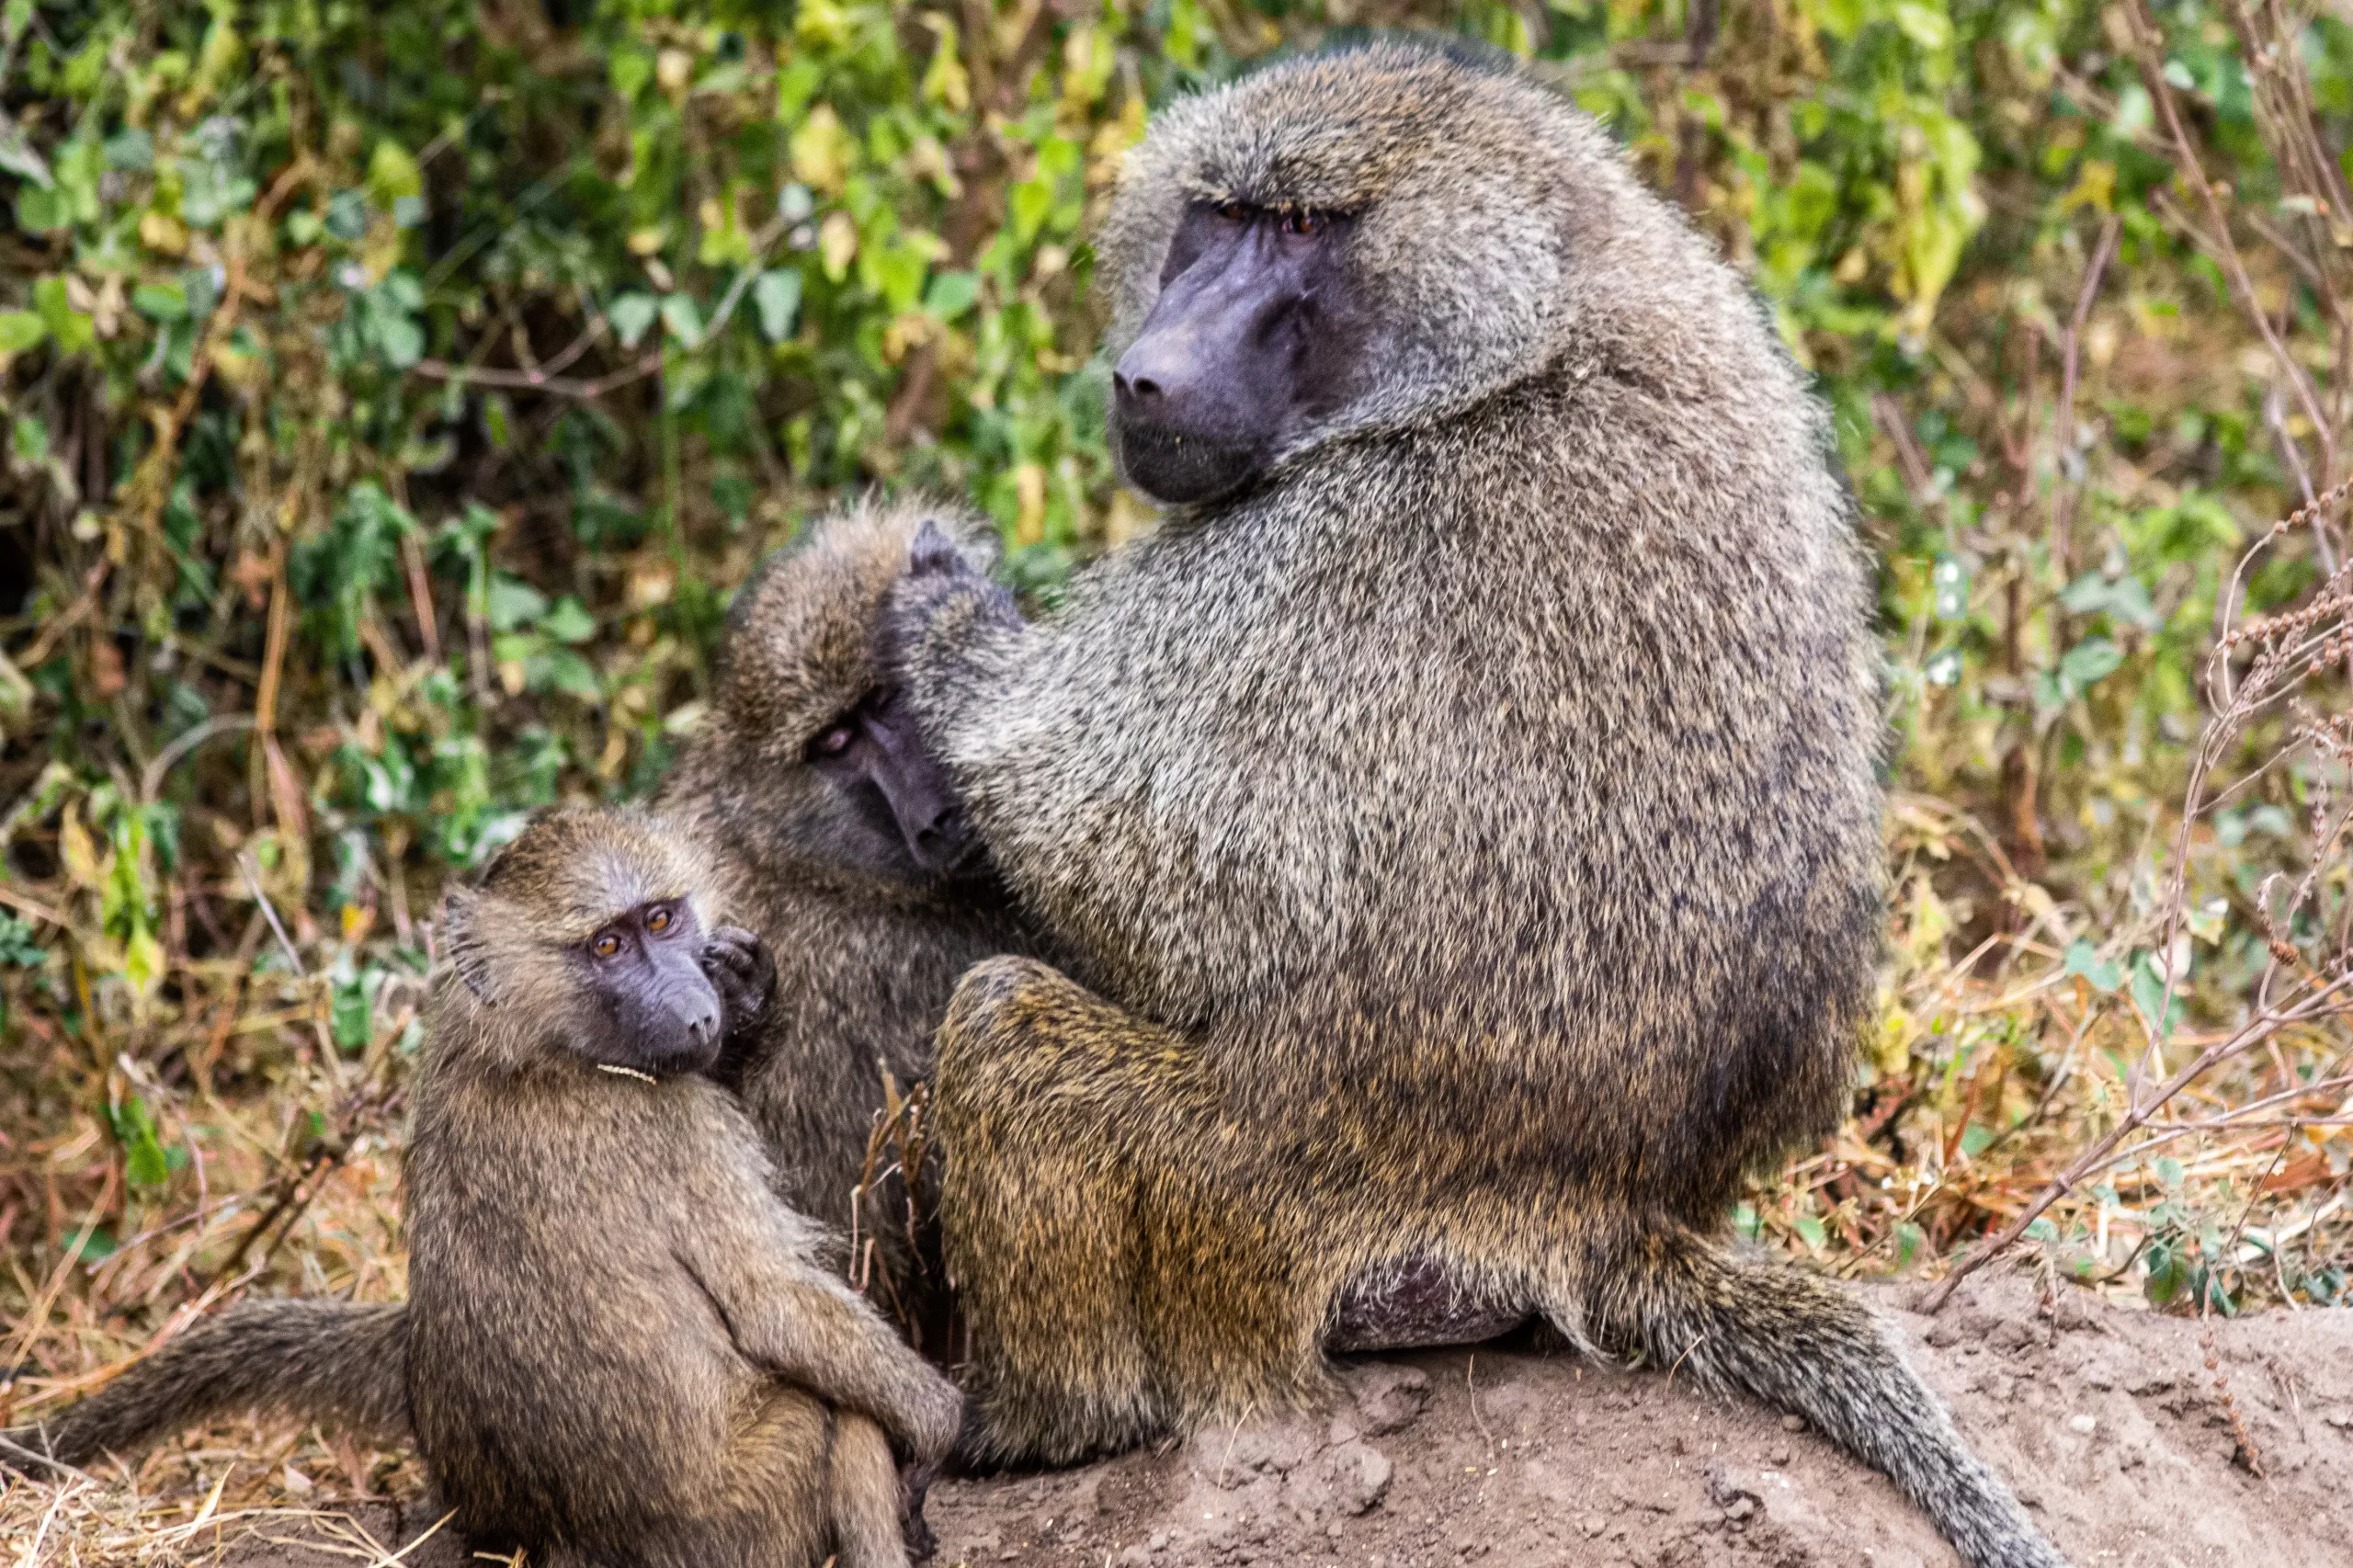 Olive baboons spotted while trekking Kilimanjaro